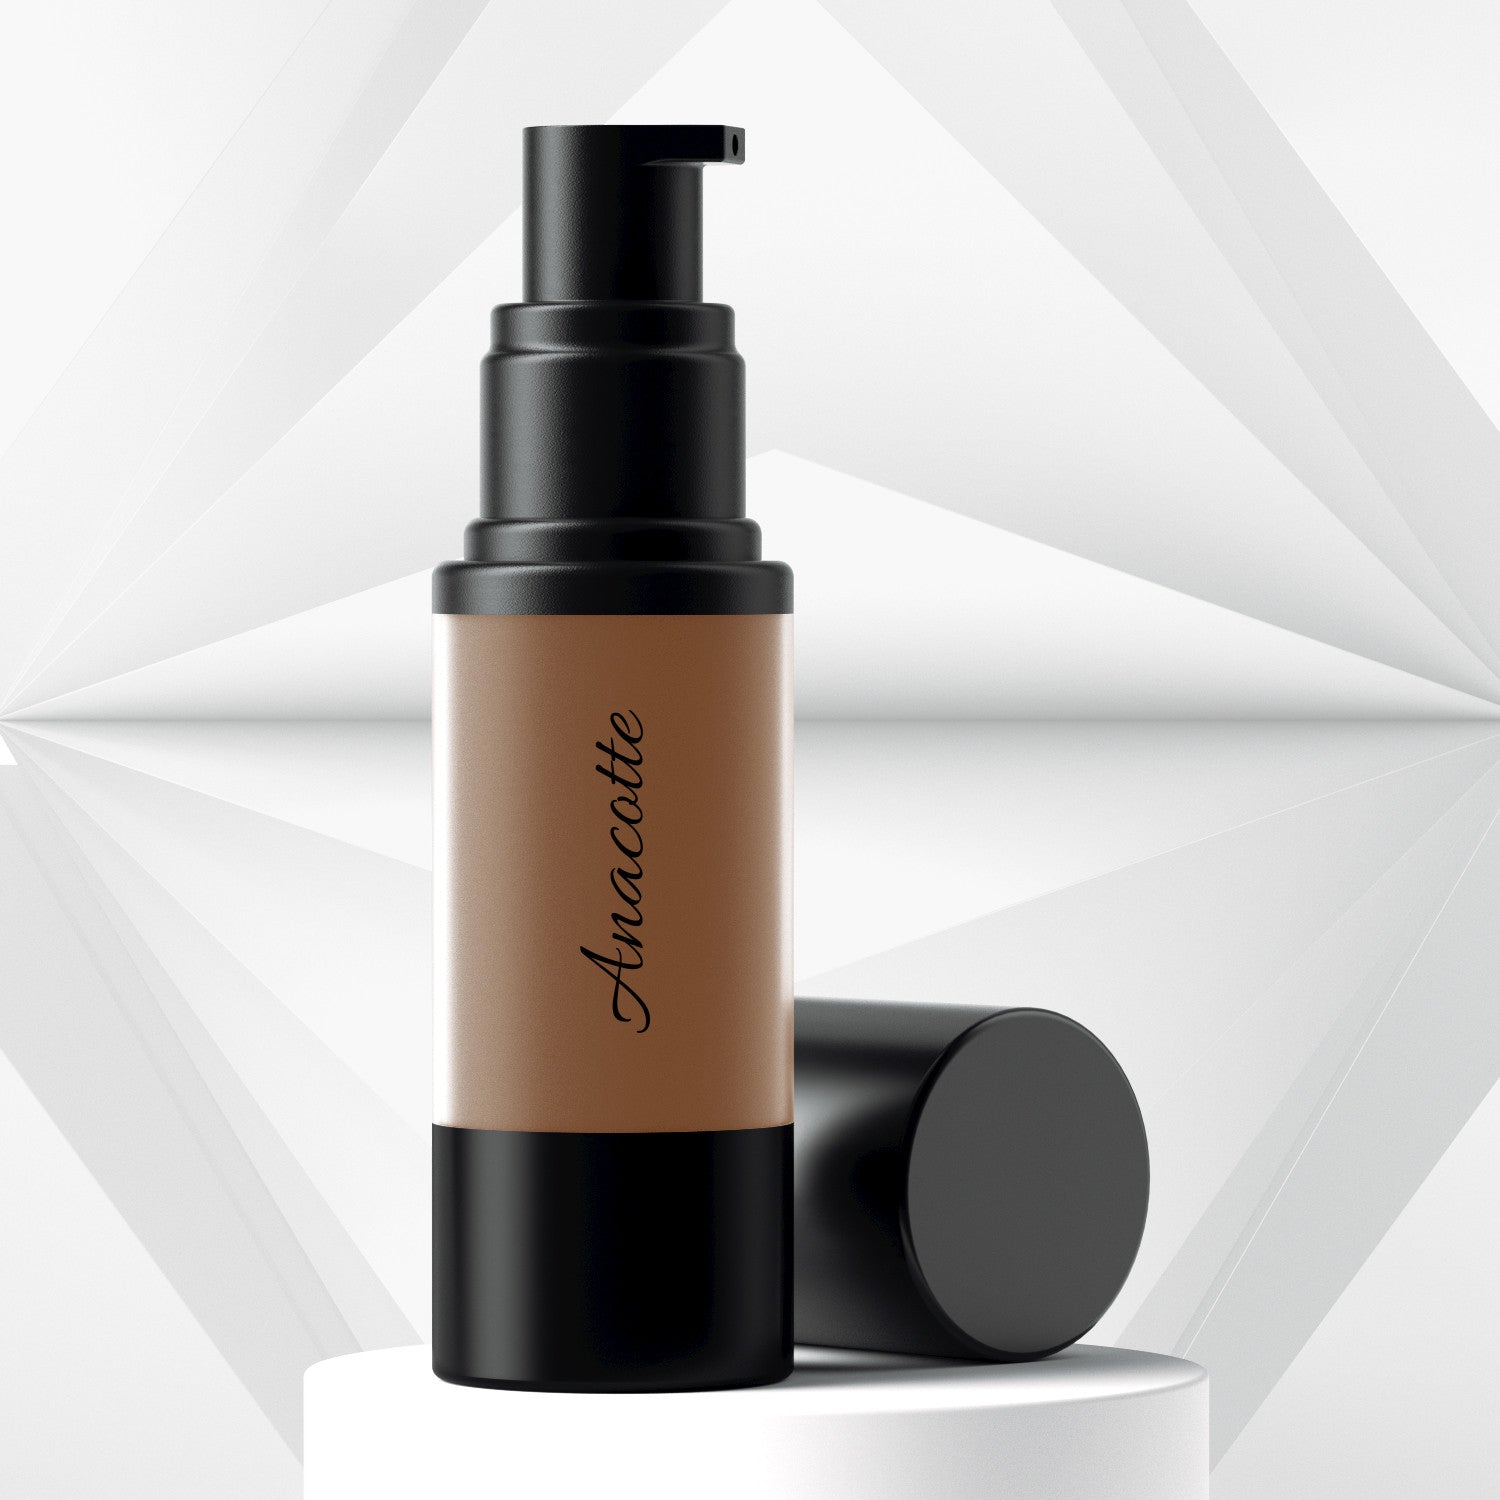 Anacotte Anti-aging Oil-Free Foundation Makeup brown